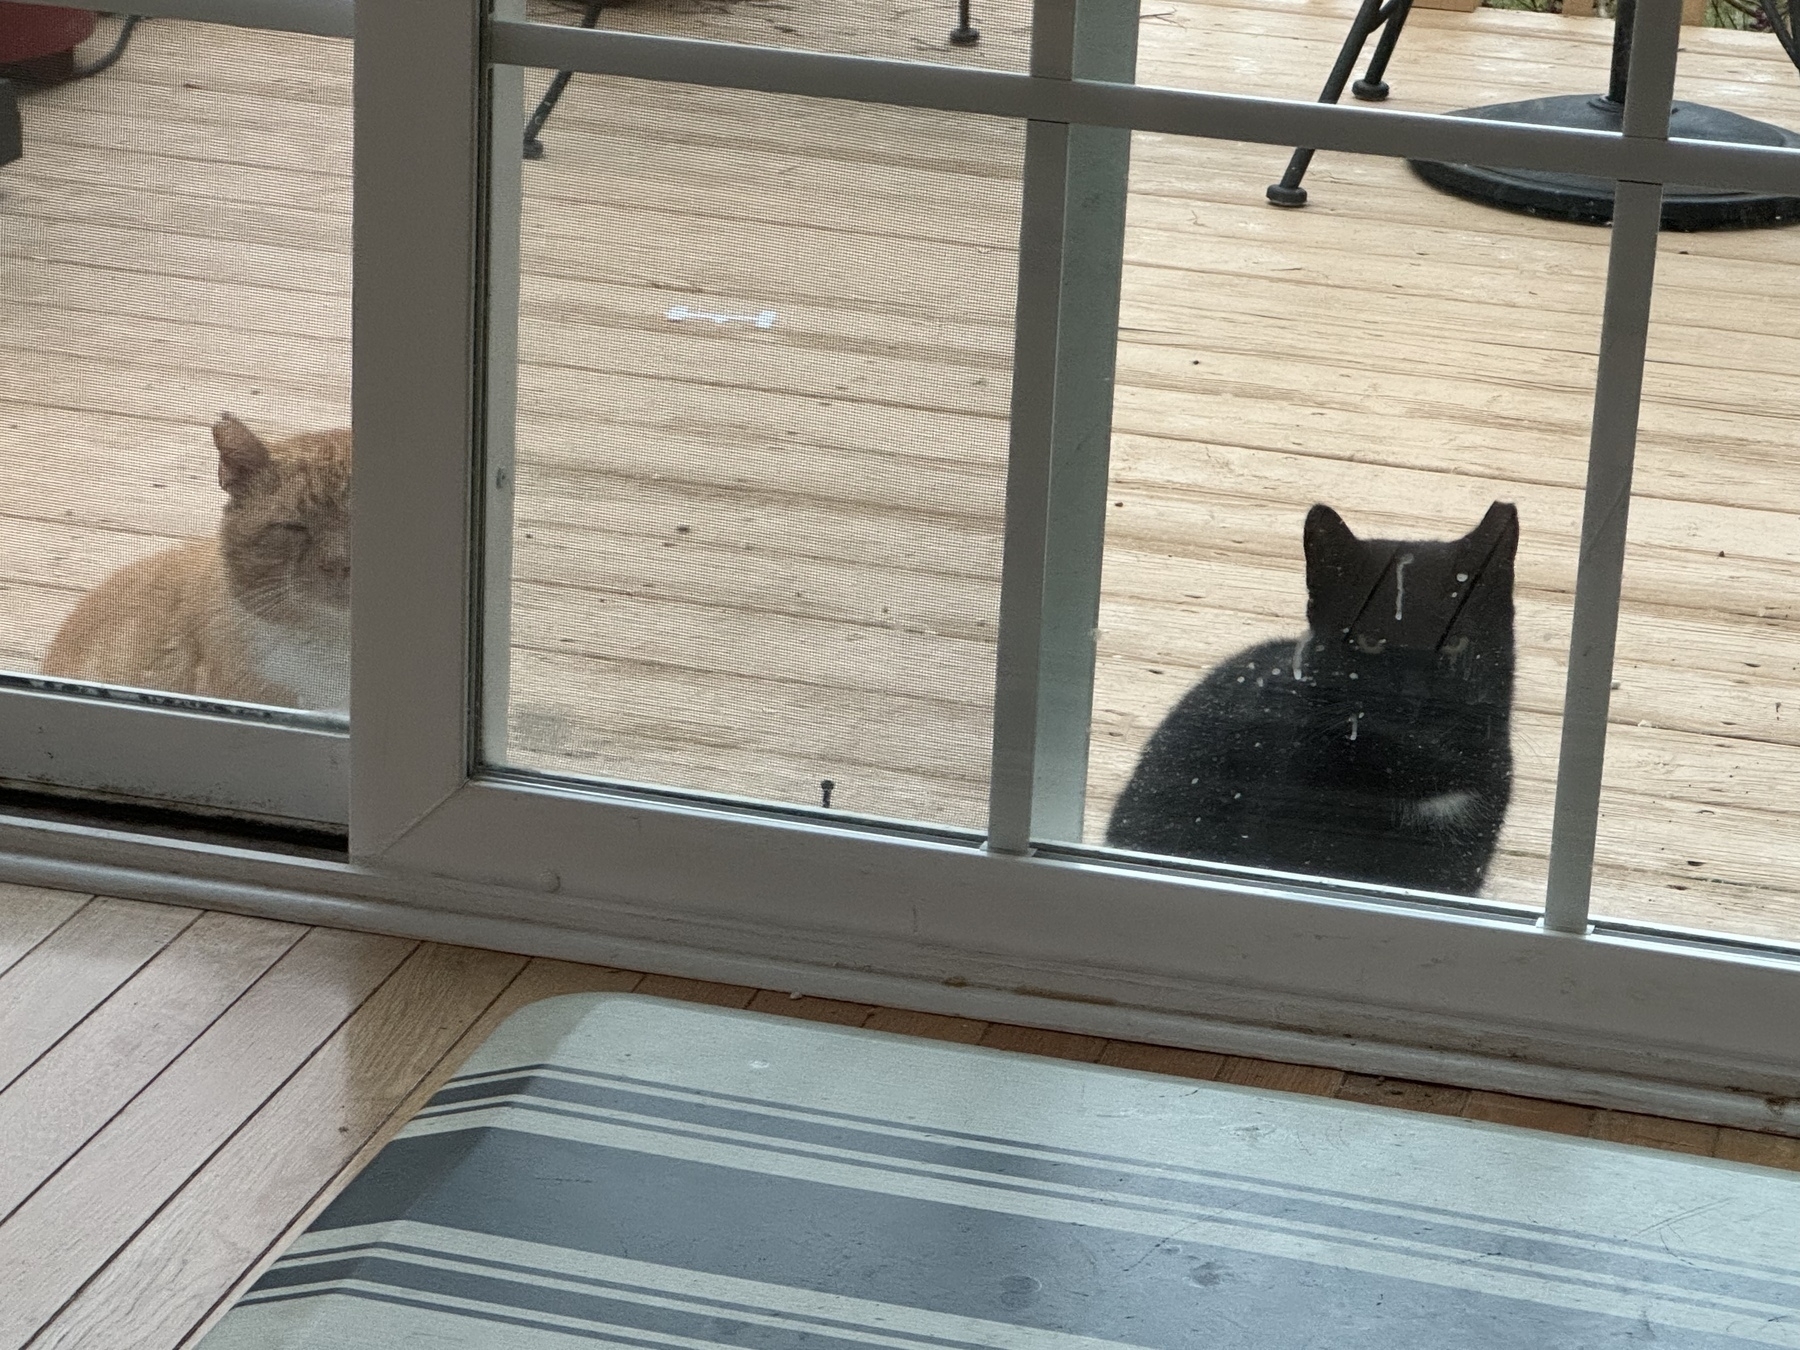 Feral cats on deck